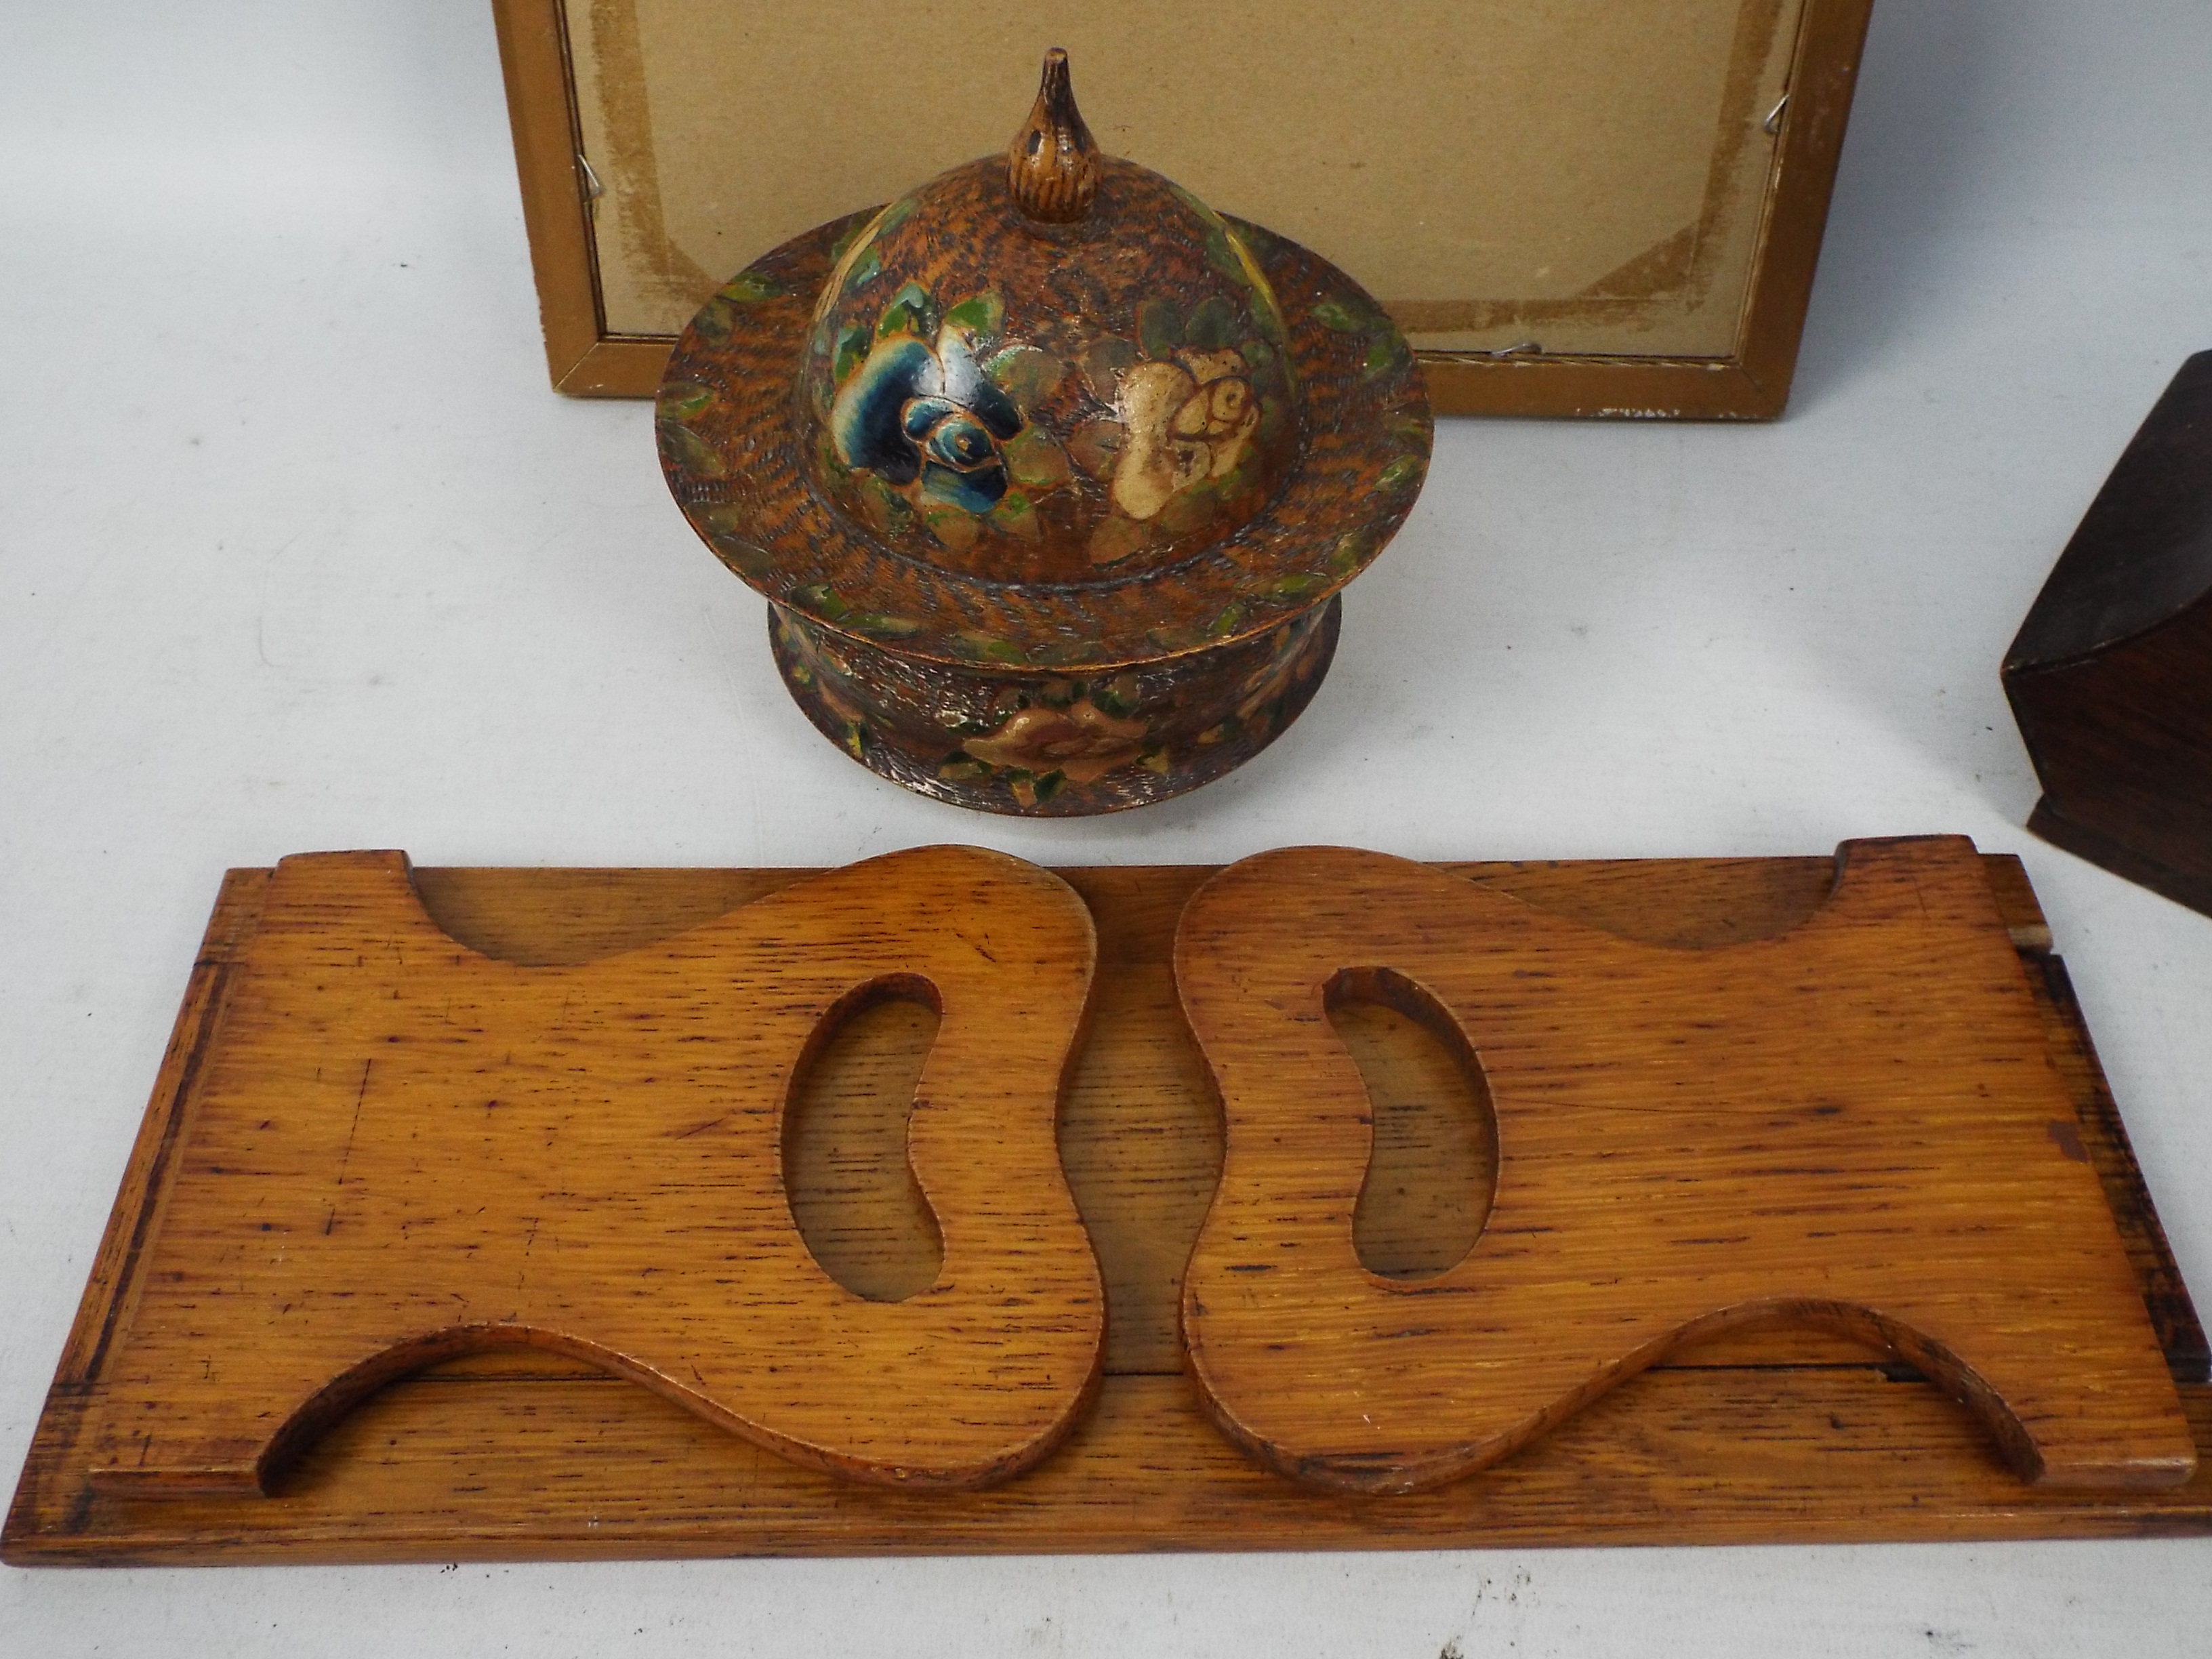 Lot to include an oak cased mantel clock, carved wooden book slide, - Image 7 of 7